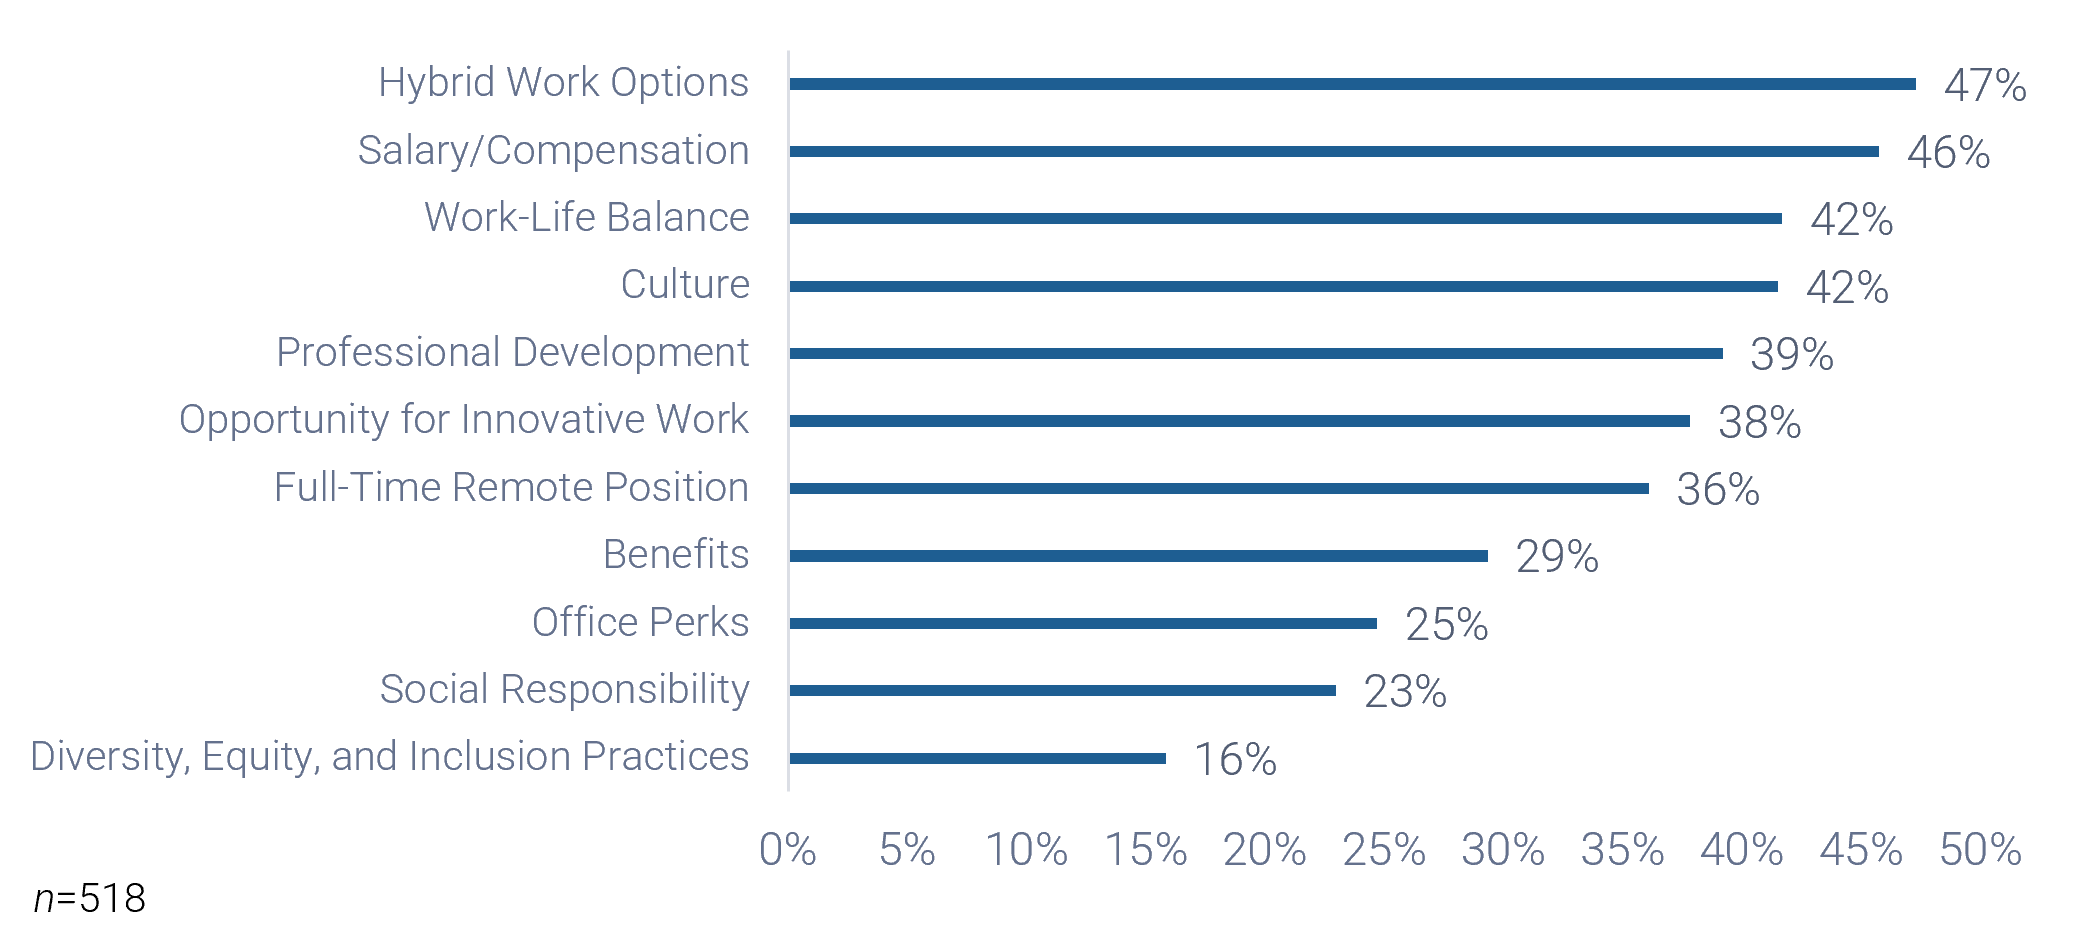 The image contains a screenshot of a bar graph that demonstrates what needs to be considered when looking at a potential employer.